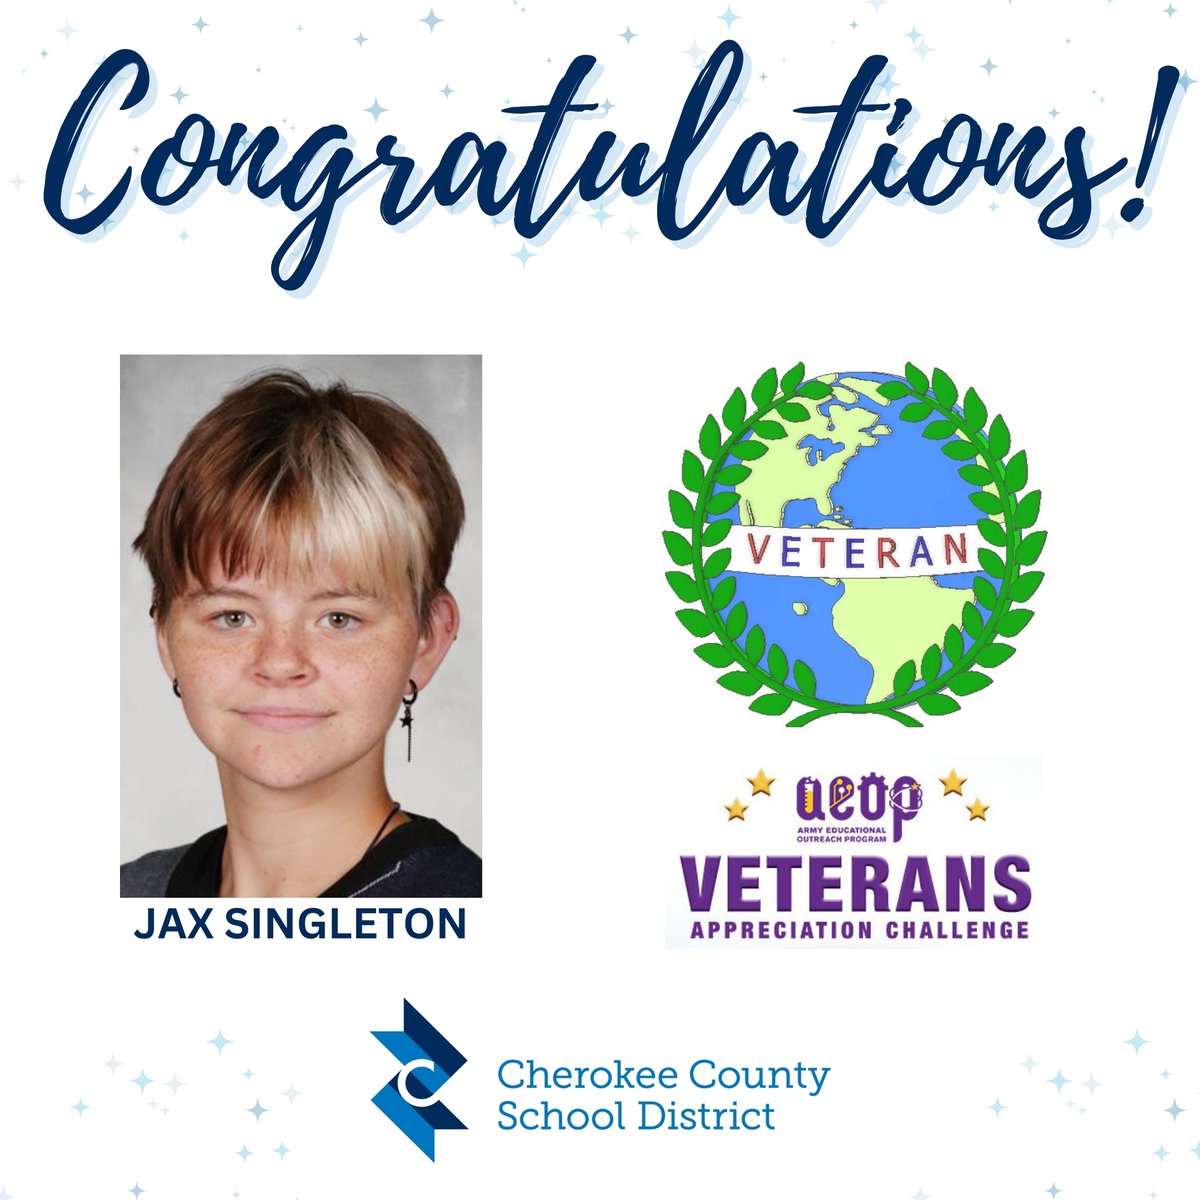 A CCSD student has earned national recognition for career skills! Woodstock HS sophomore Jax Singleton was named one of 20 national Army Educational Outreach Program Veterans Appreciation Challenge finalists by Future Engineers. More: cherokeek12.net/post-detail/~b… #CCSDfam #CCSDstem